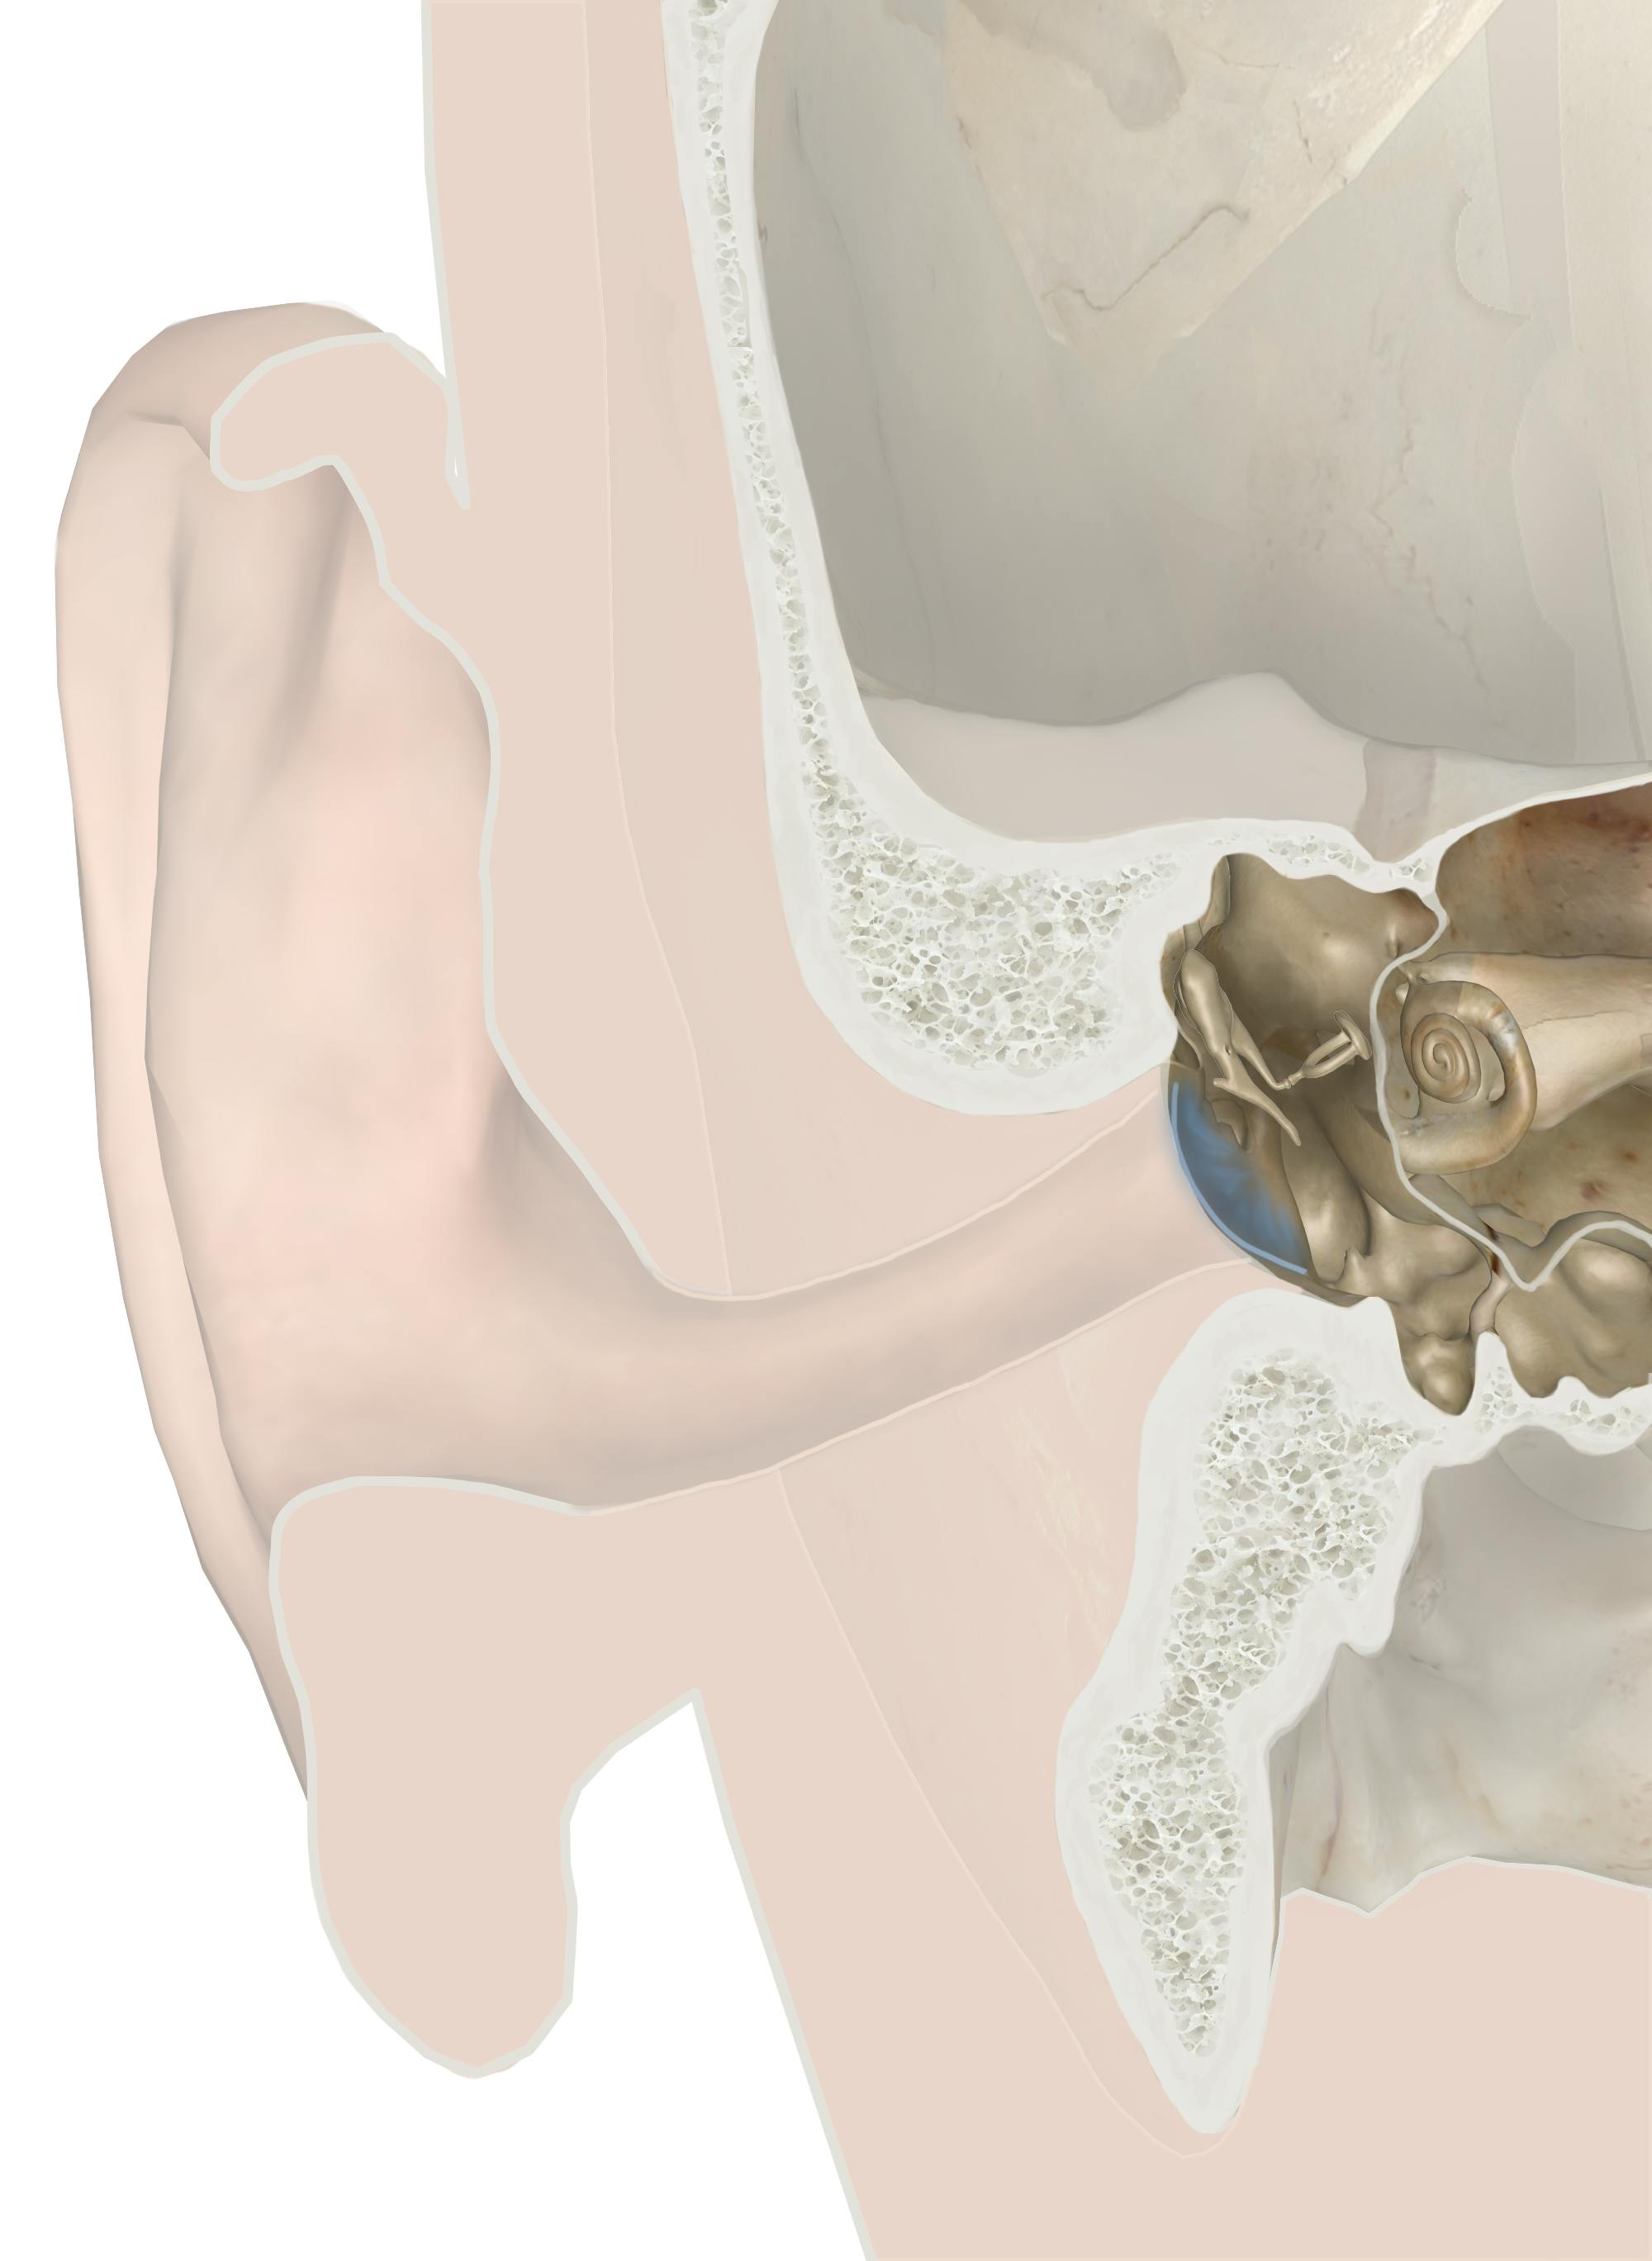 Anatomy of human ear, auditory ossicles, malleus,incus, stapes